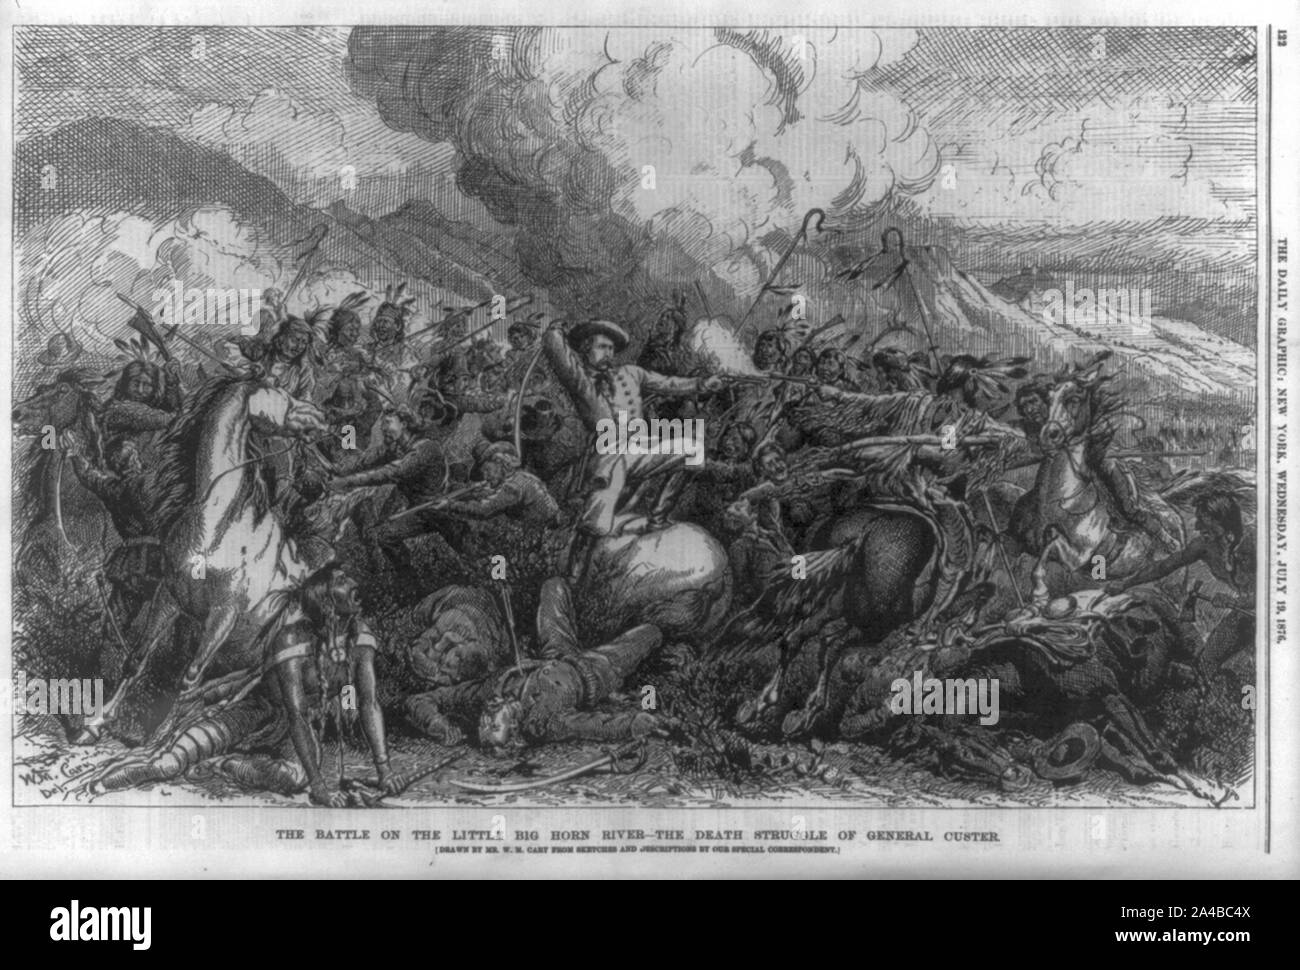 The Battle on the Little Big Horn River - The death struggle of General Custer Stock Photo